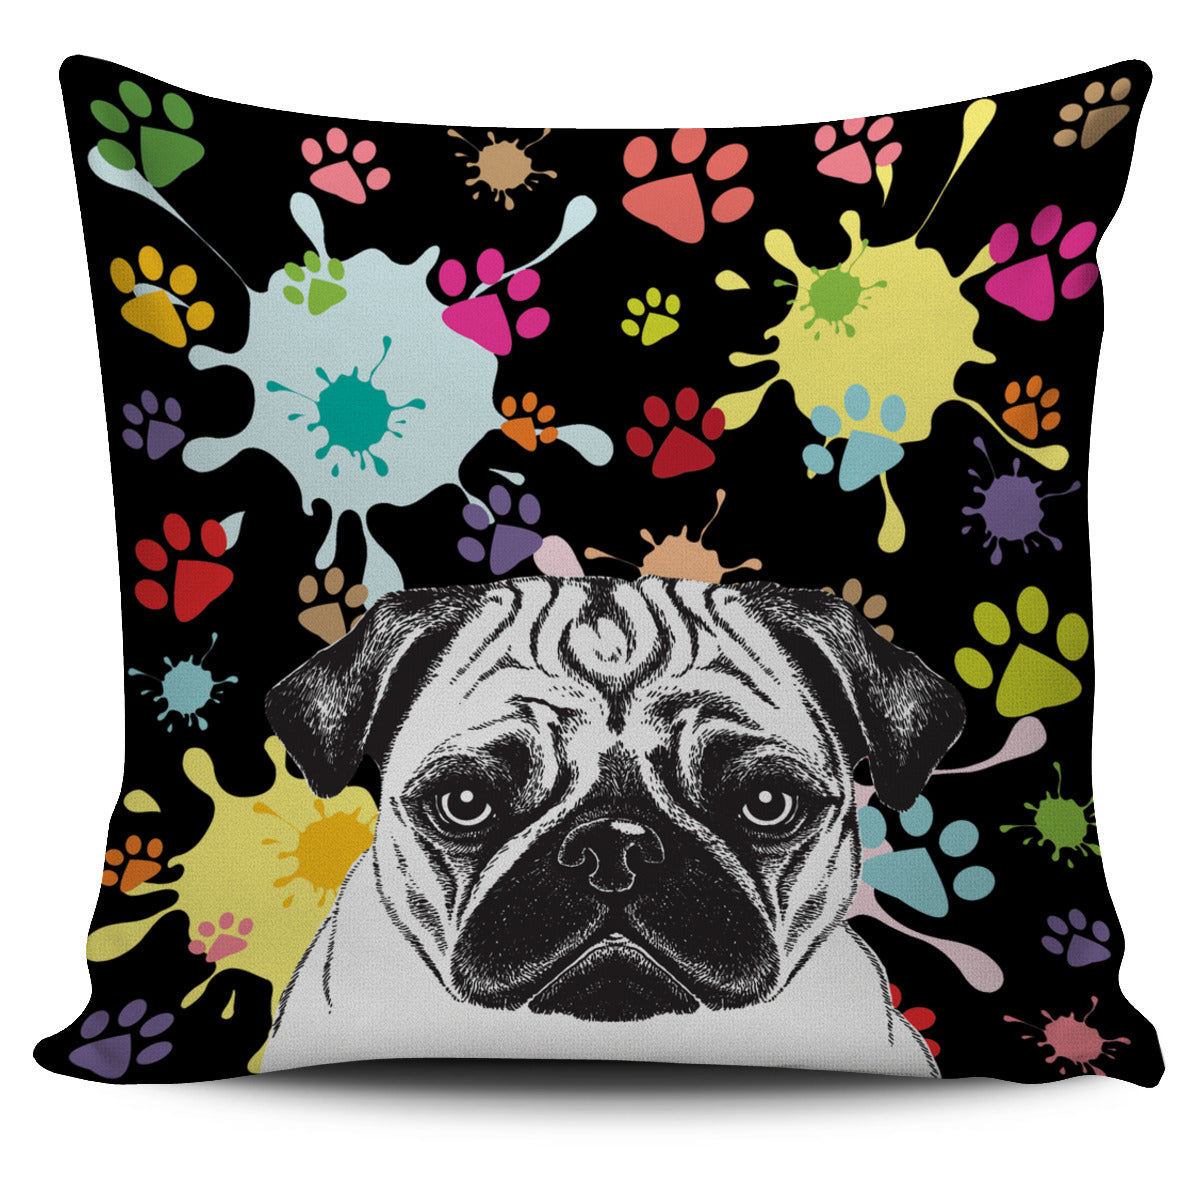 Artsy Pug Pillow Cover